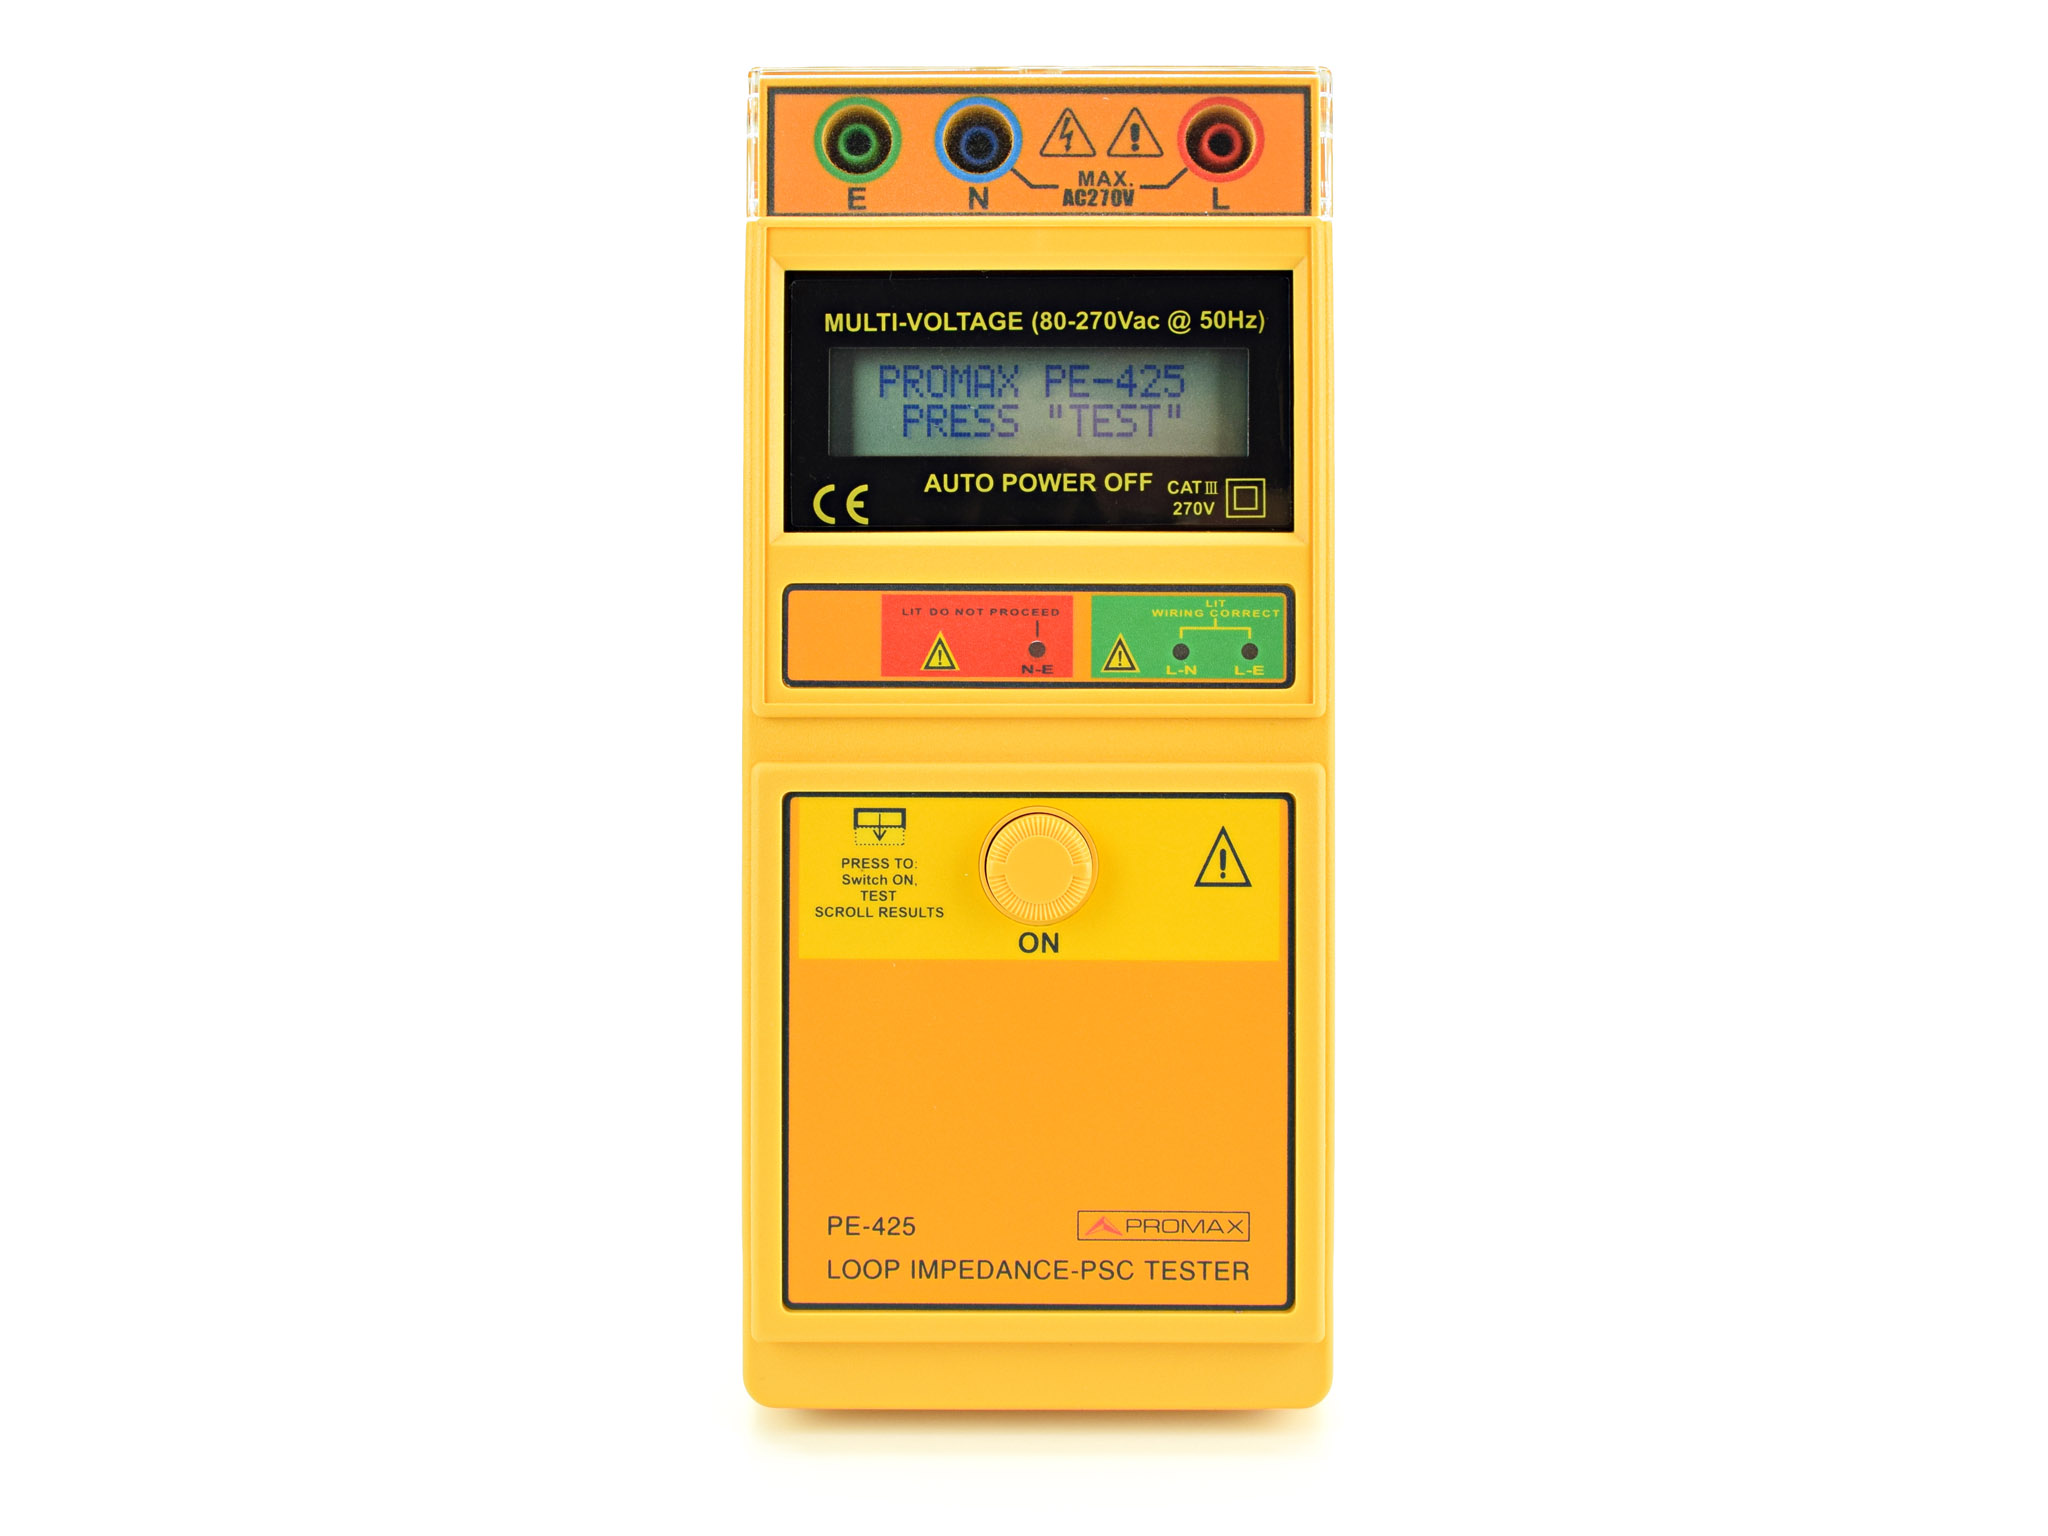 PE-425: Electrical Multifunction network analyzer (LOOP, PSC and Earth Tester)